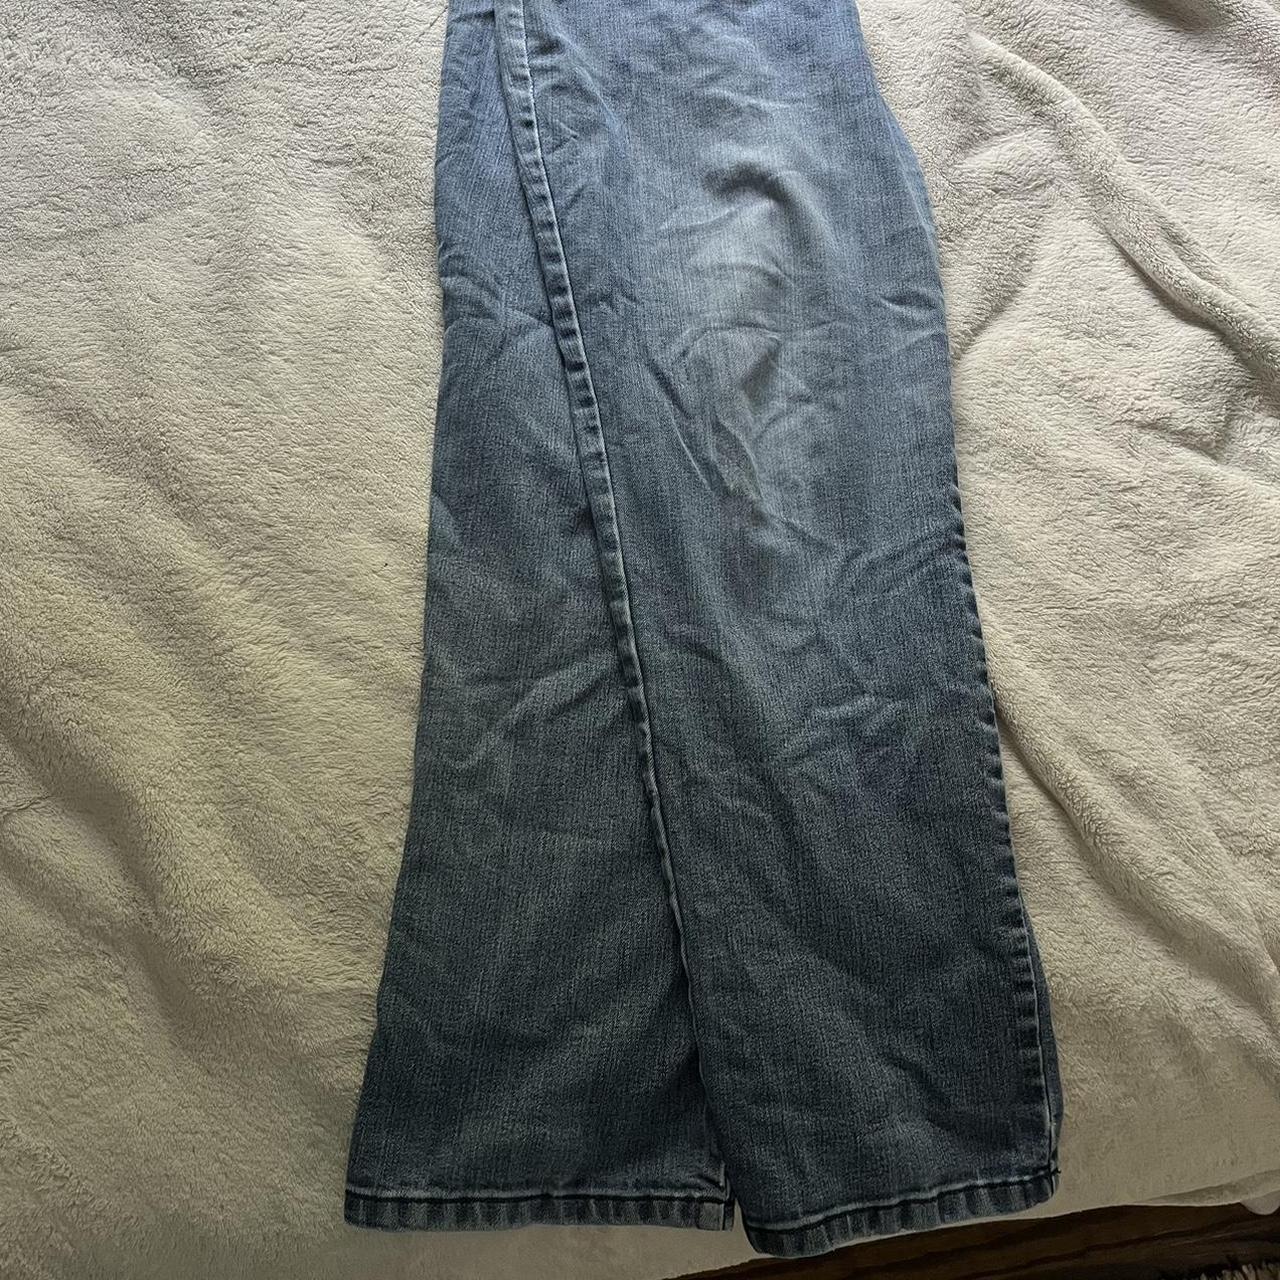 Low rise baggy jeans size 12 but fits like size 6/8... - Depop